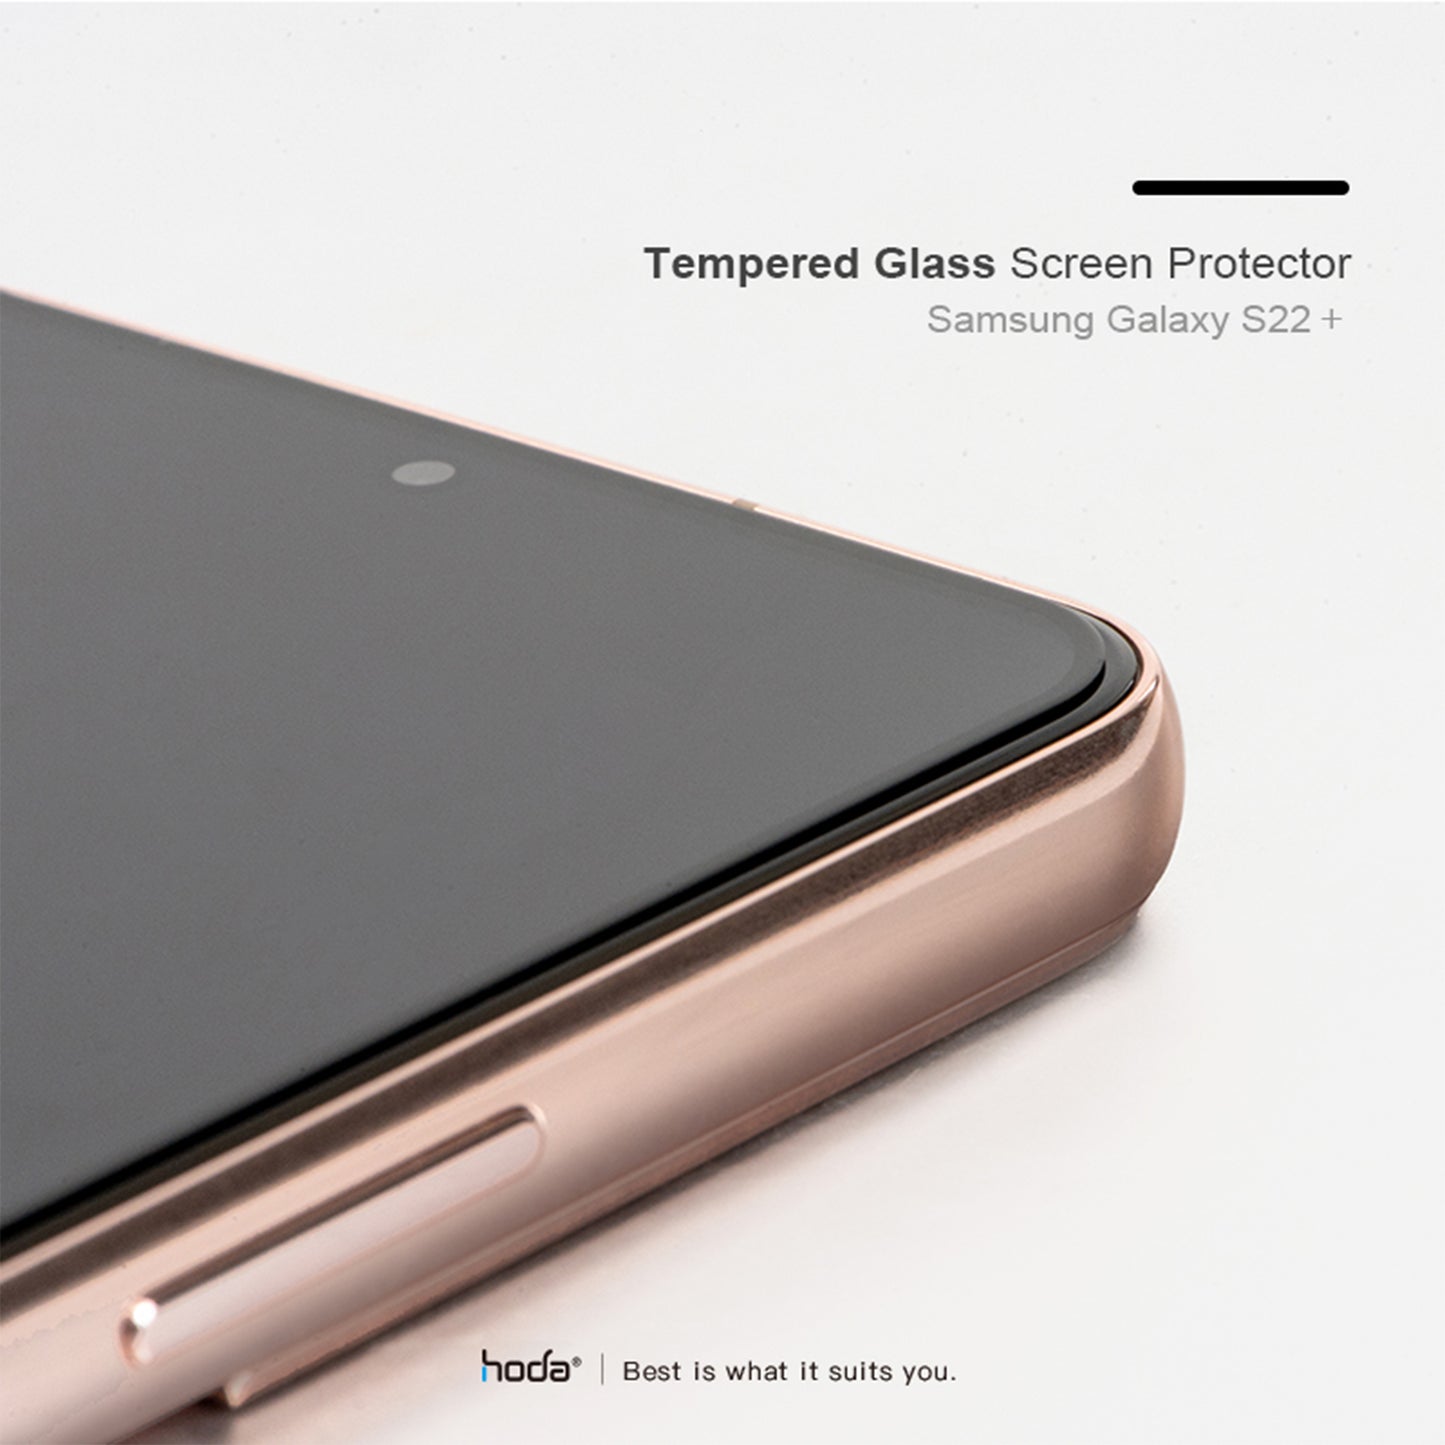 Hoda Tempered Glass for Samsung Galaxy S22 - 0.21mm 2.5D Full Coverage Screen Protector - Clear (Barcode: 4711103544129 )